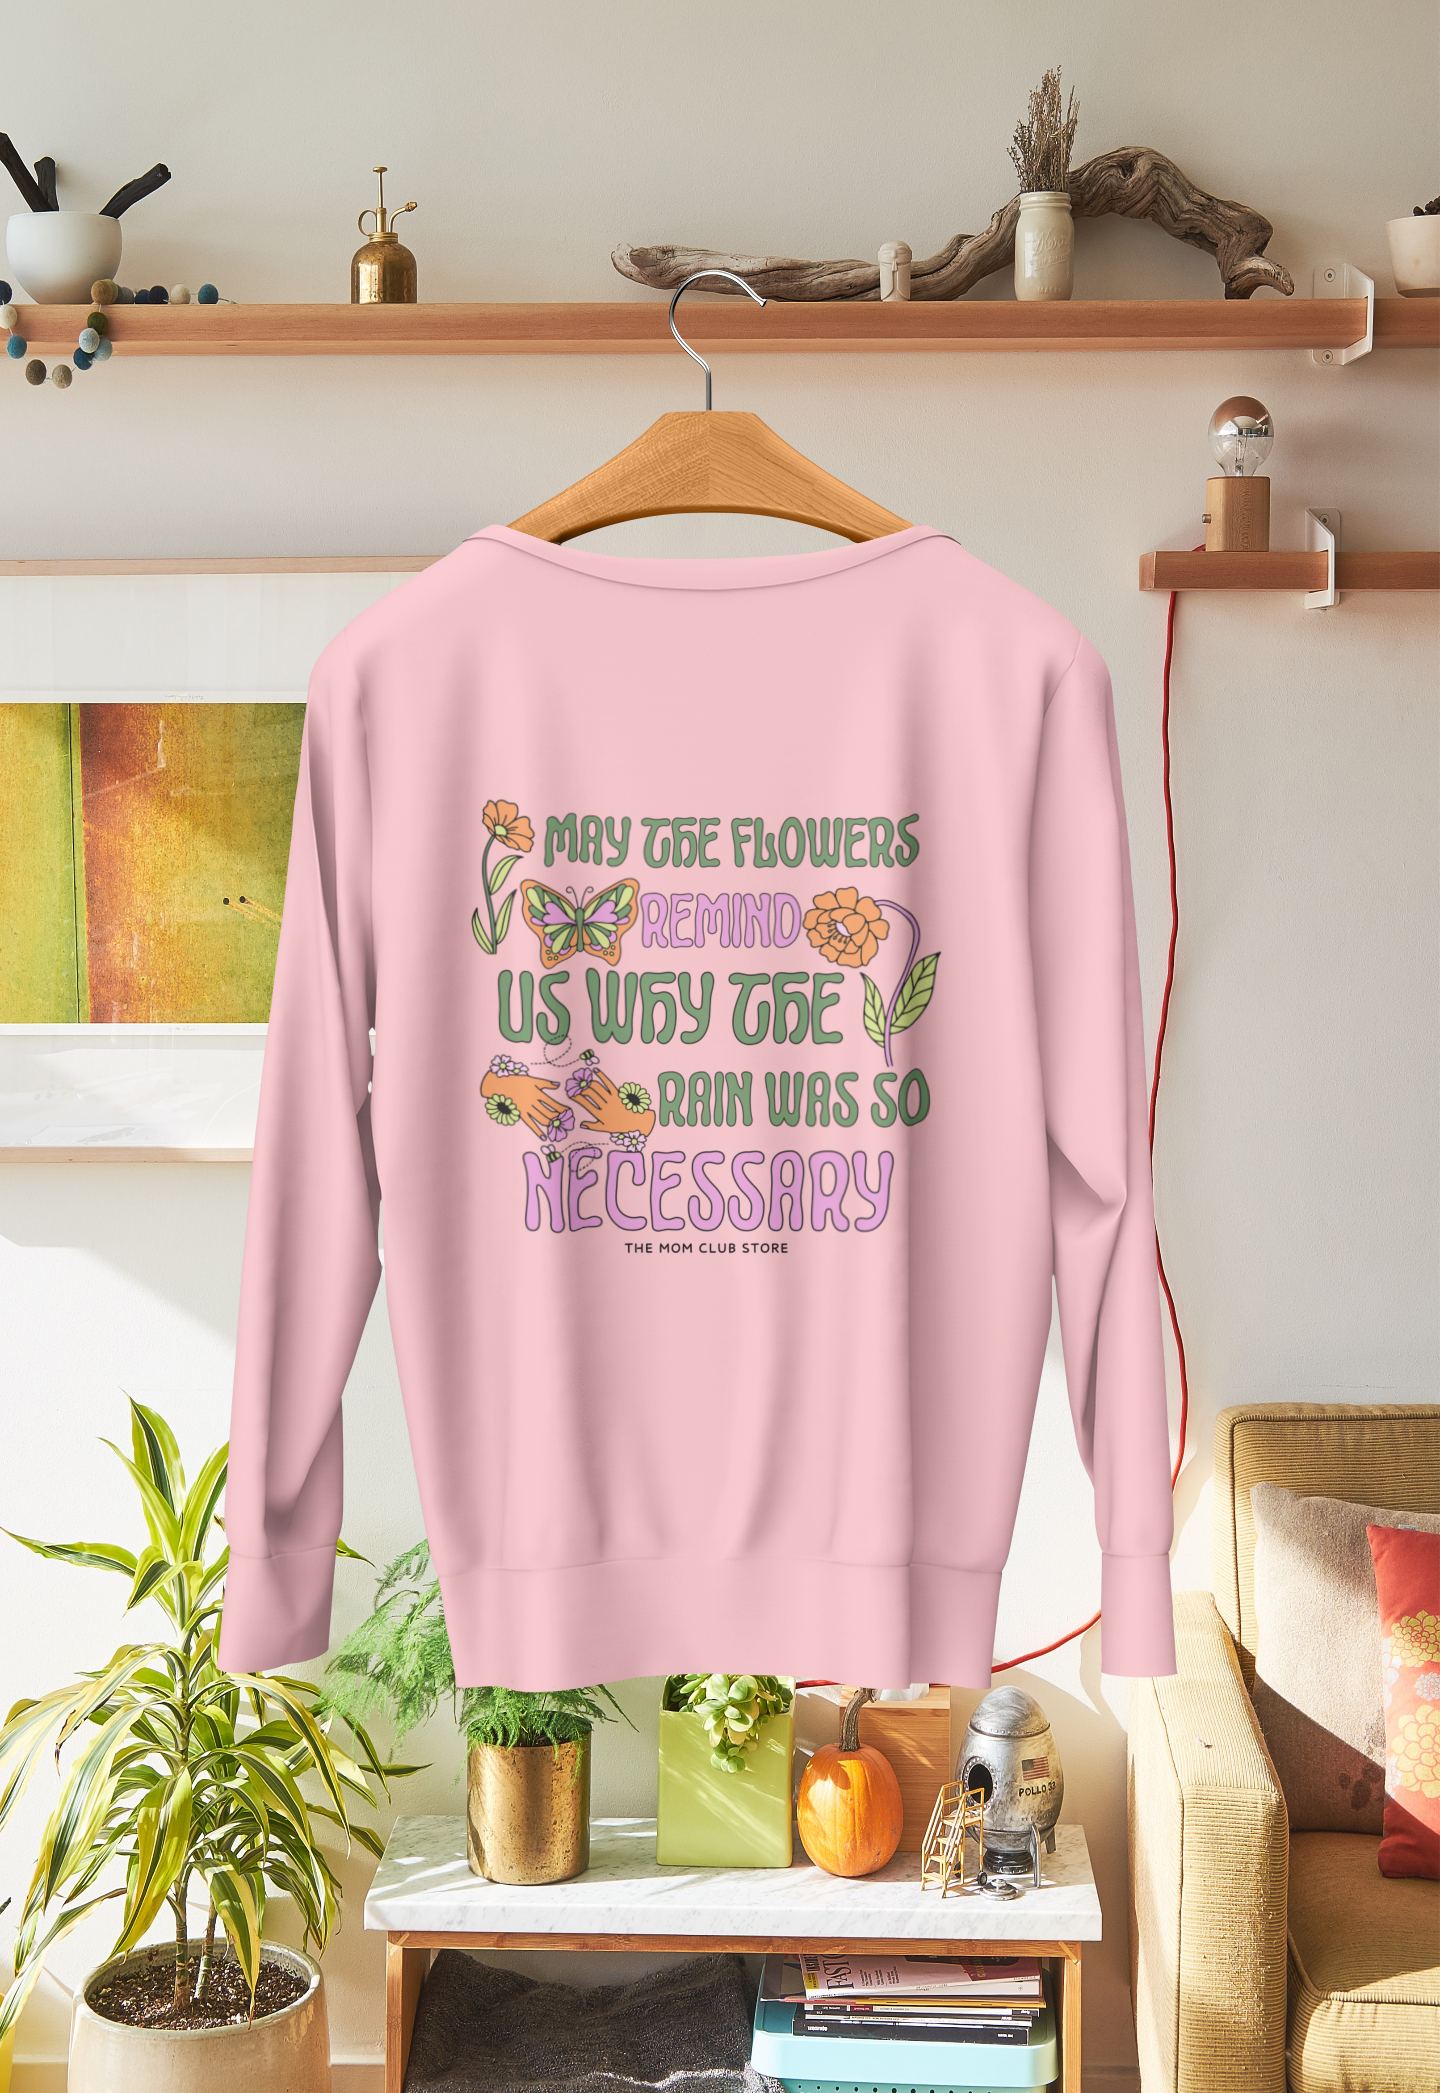 Sweatshirt crewneck -MAY THE FLOWERS- pour adulte